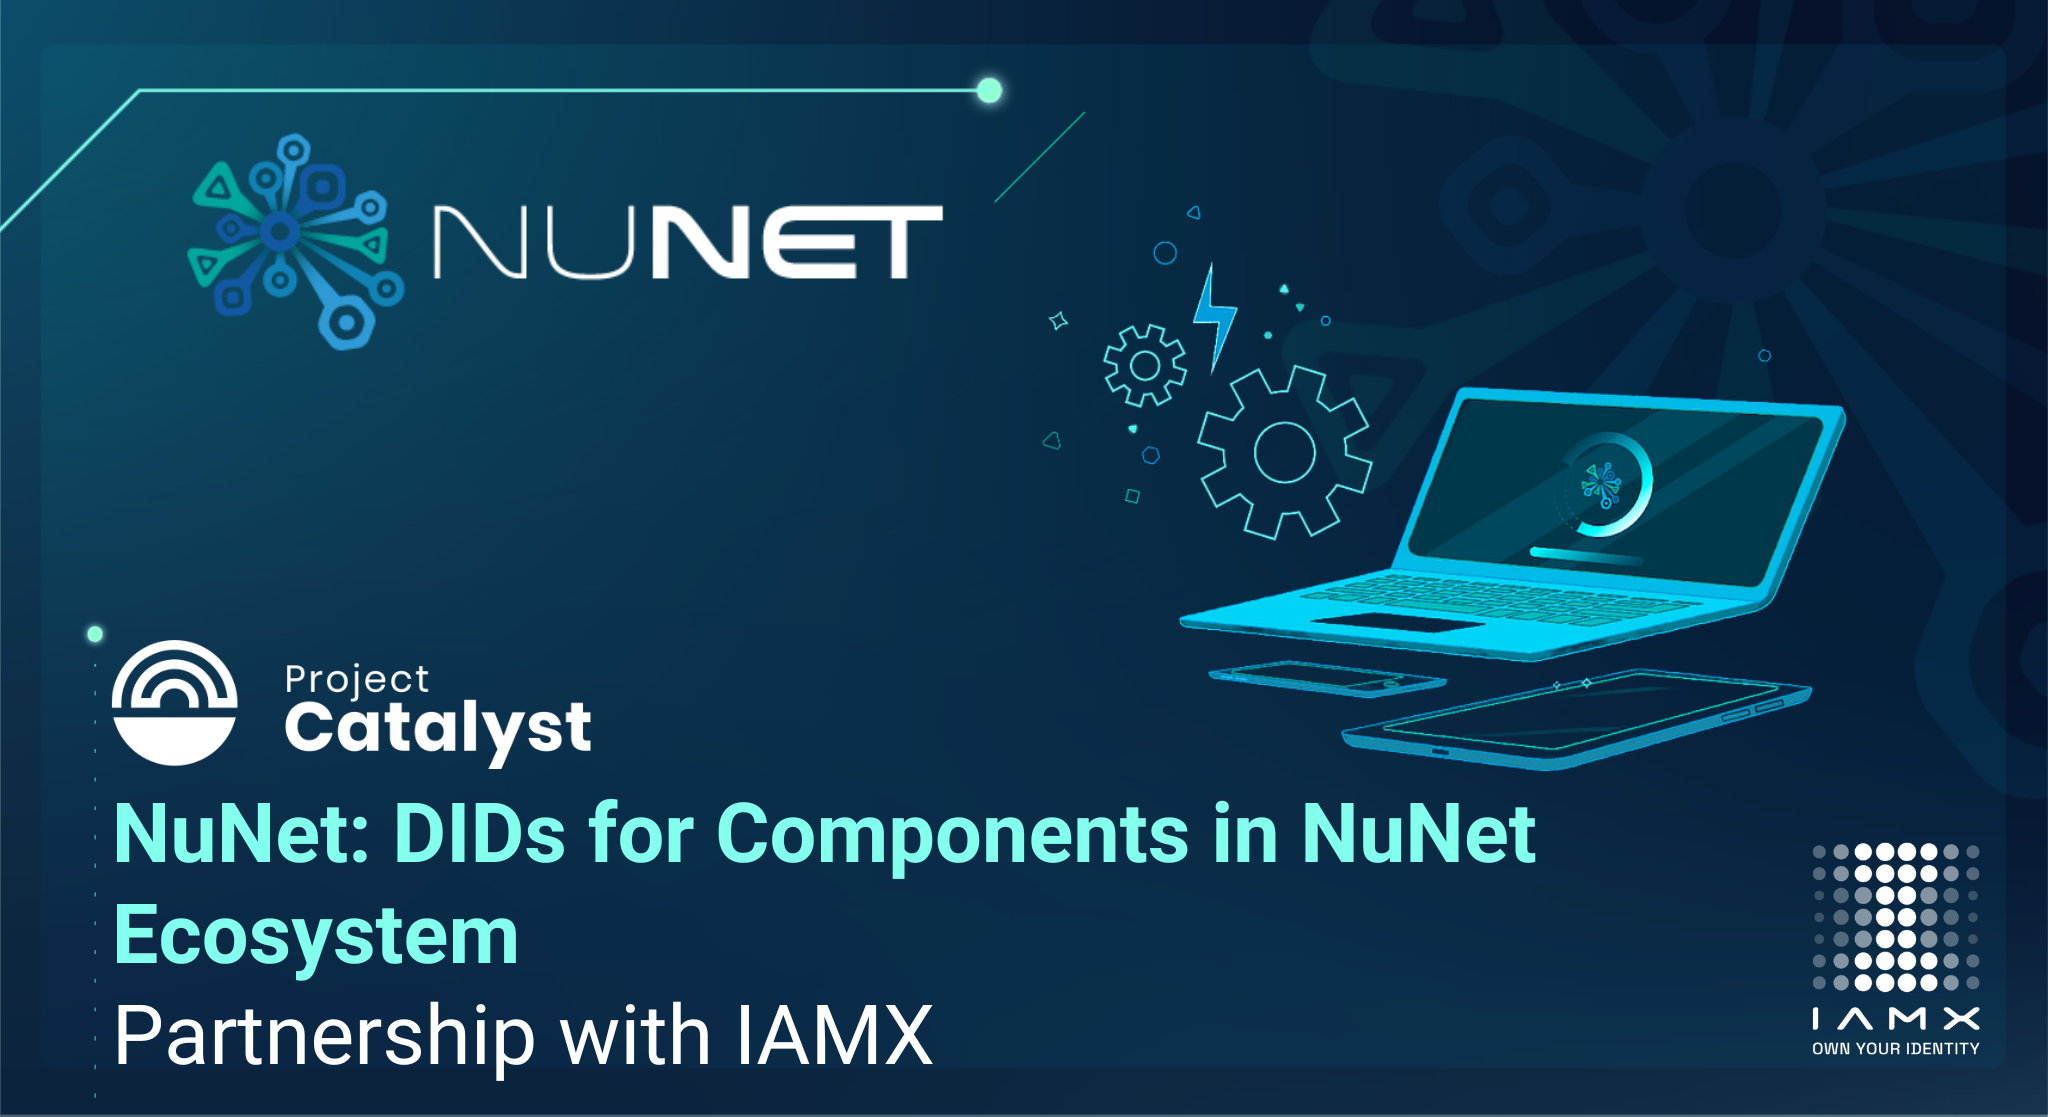 NuNet_-DIDs-for-Components-in-NuNet-Ecosystem-Partnership-with-IAMX-BLOG-7c5856.png